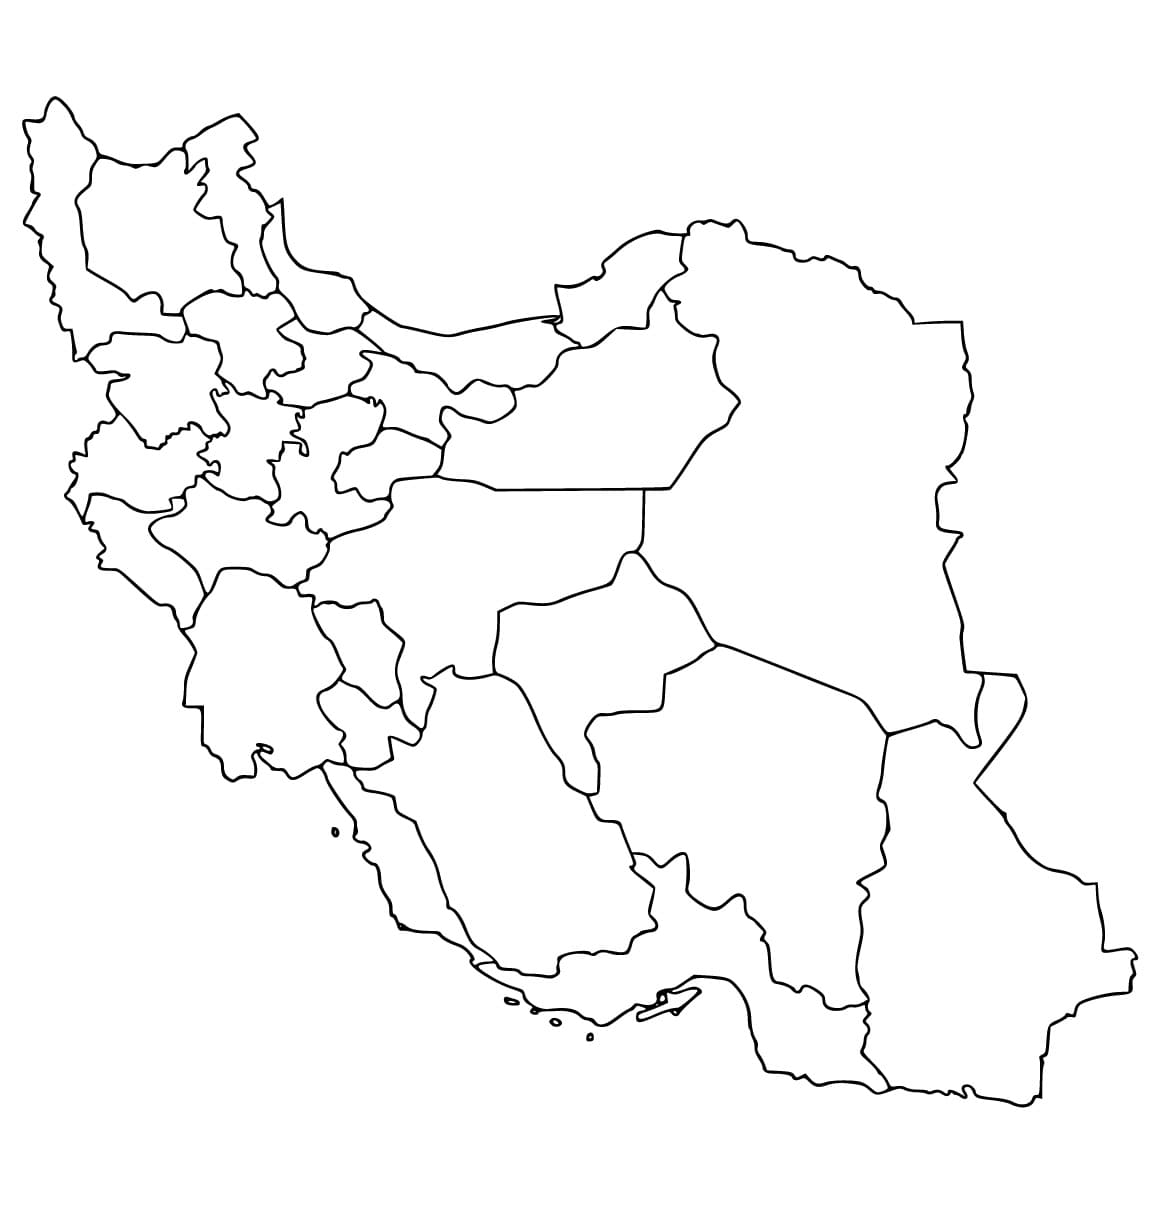 Printable Iran Map coloring page - Download, Print or Color Online for Free